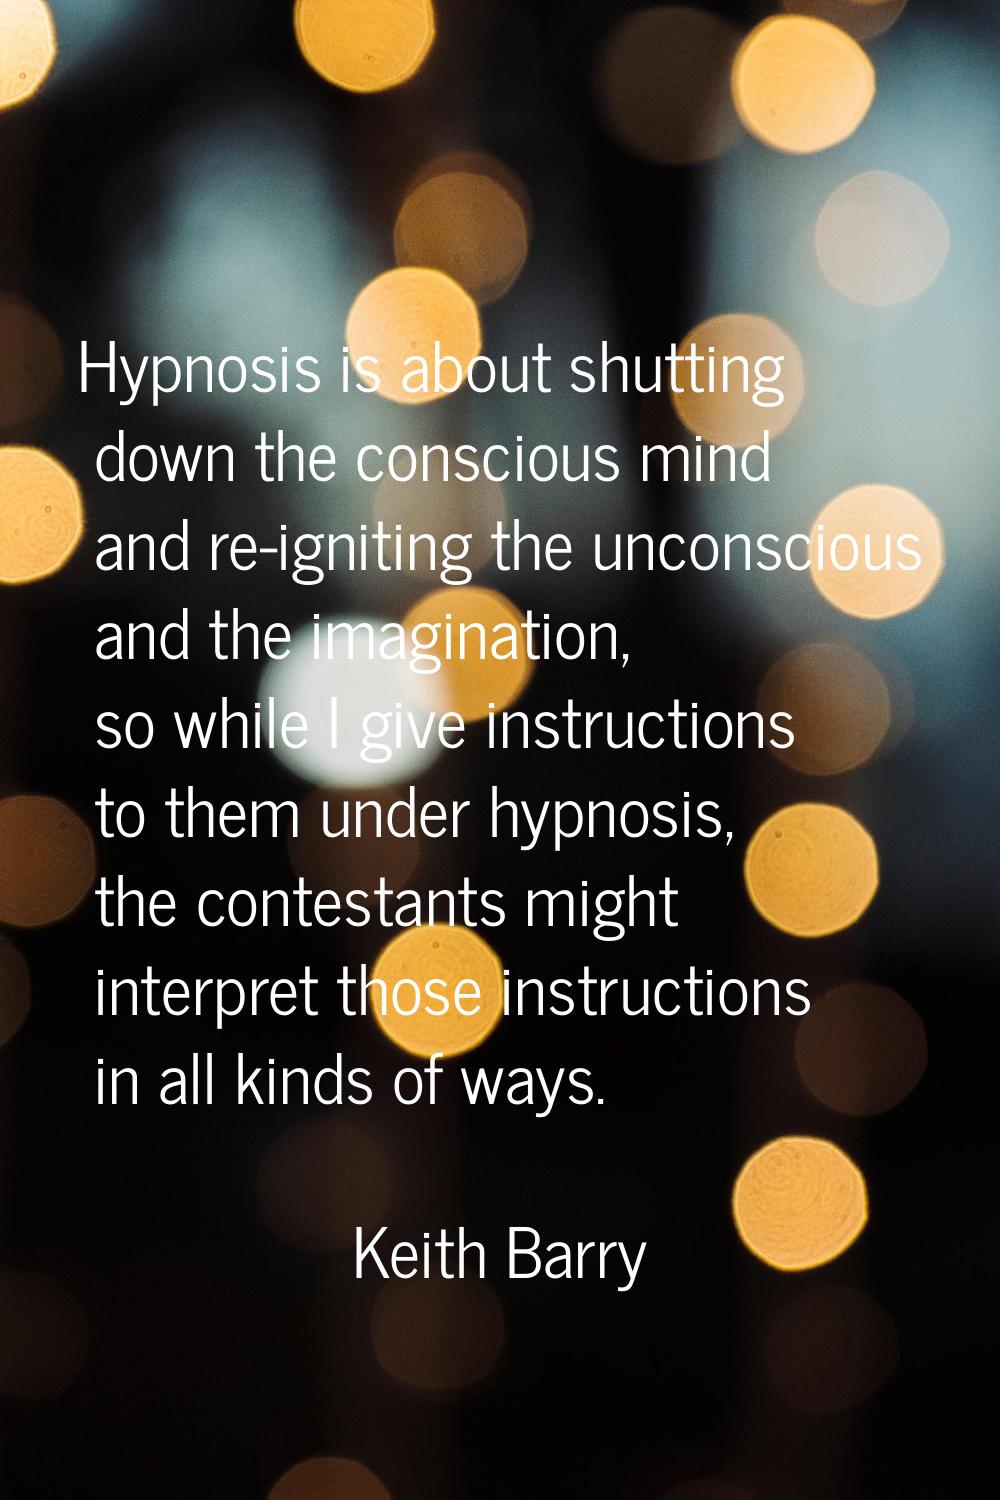 Hypnosis is about shutting down the conscious mind and re-igniting the unconscious and the imaginat